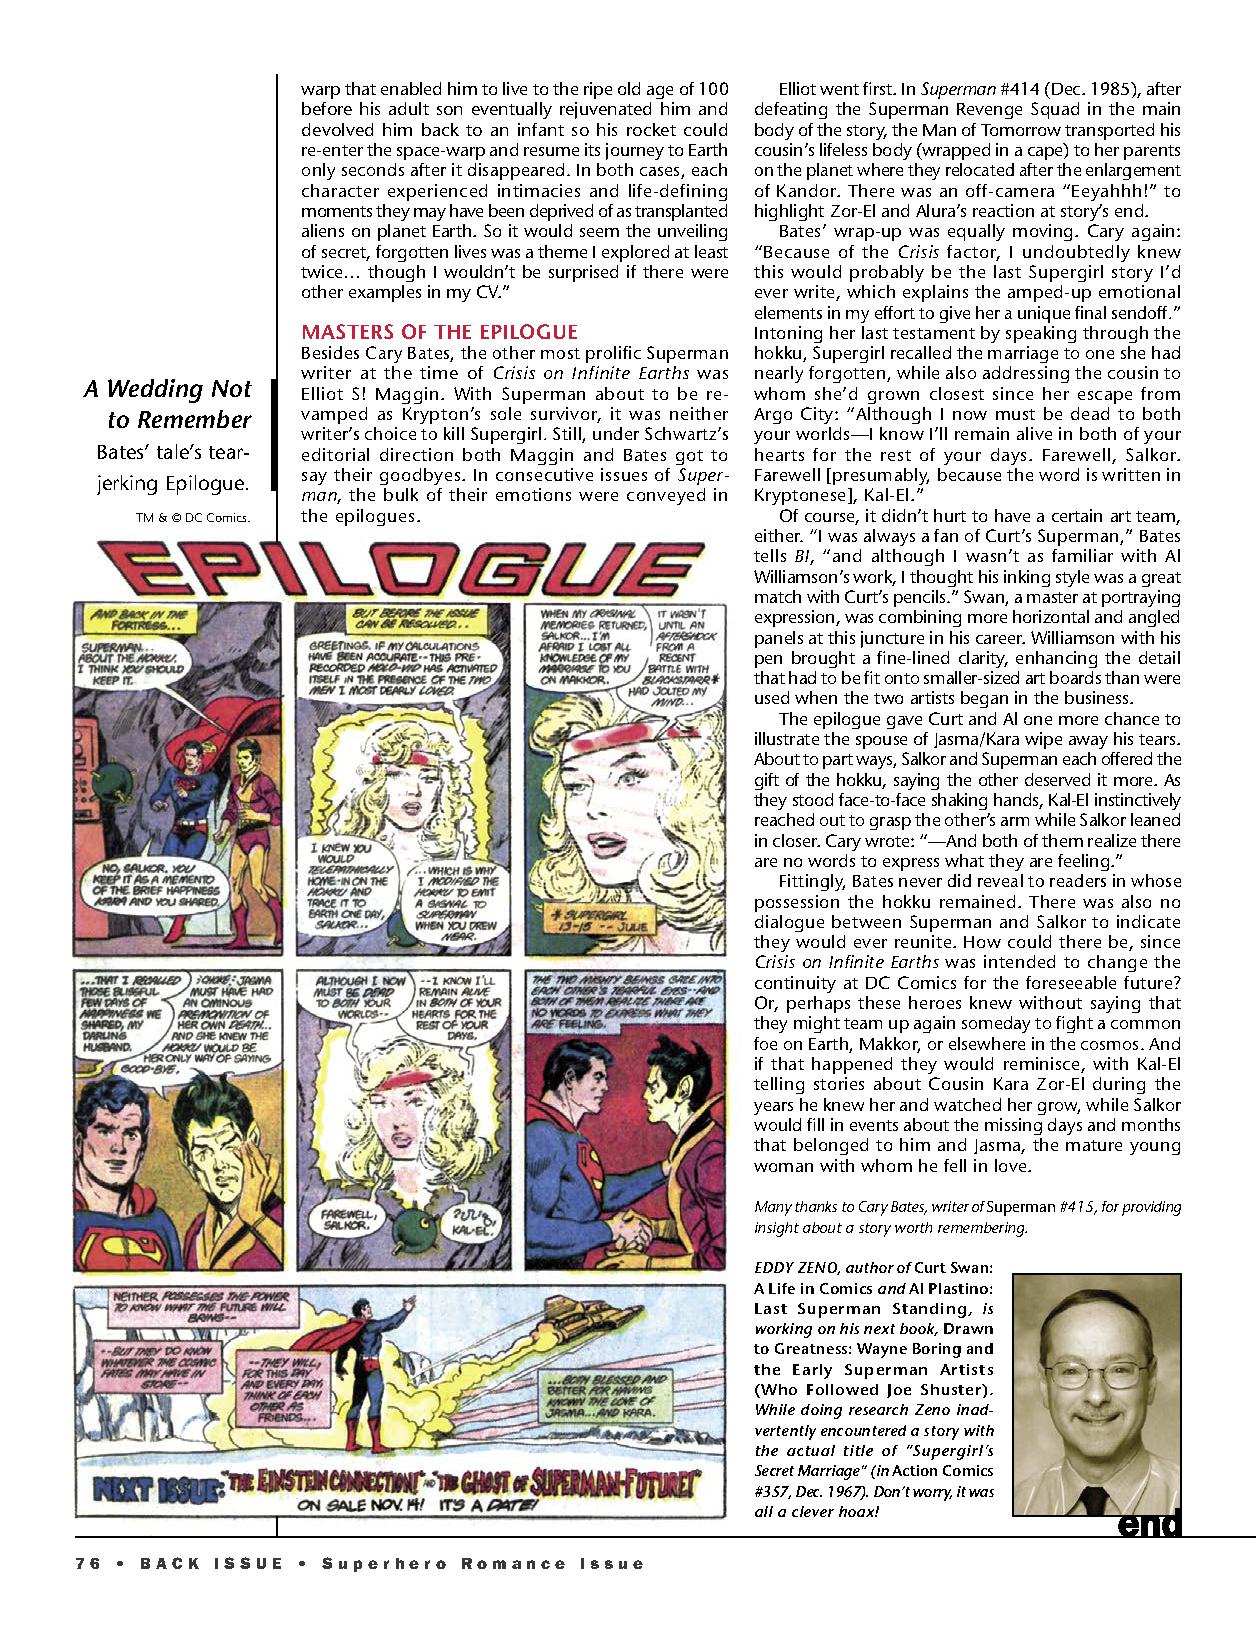 Read online Back Issue comic -  Issue #123 - 78